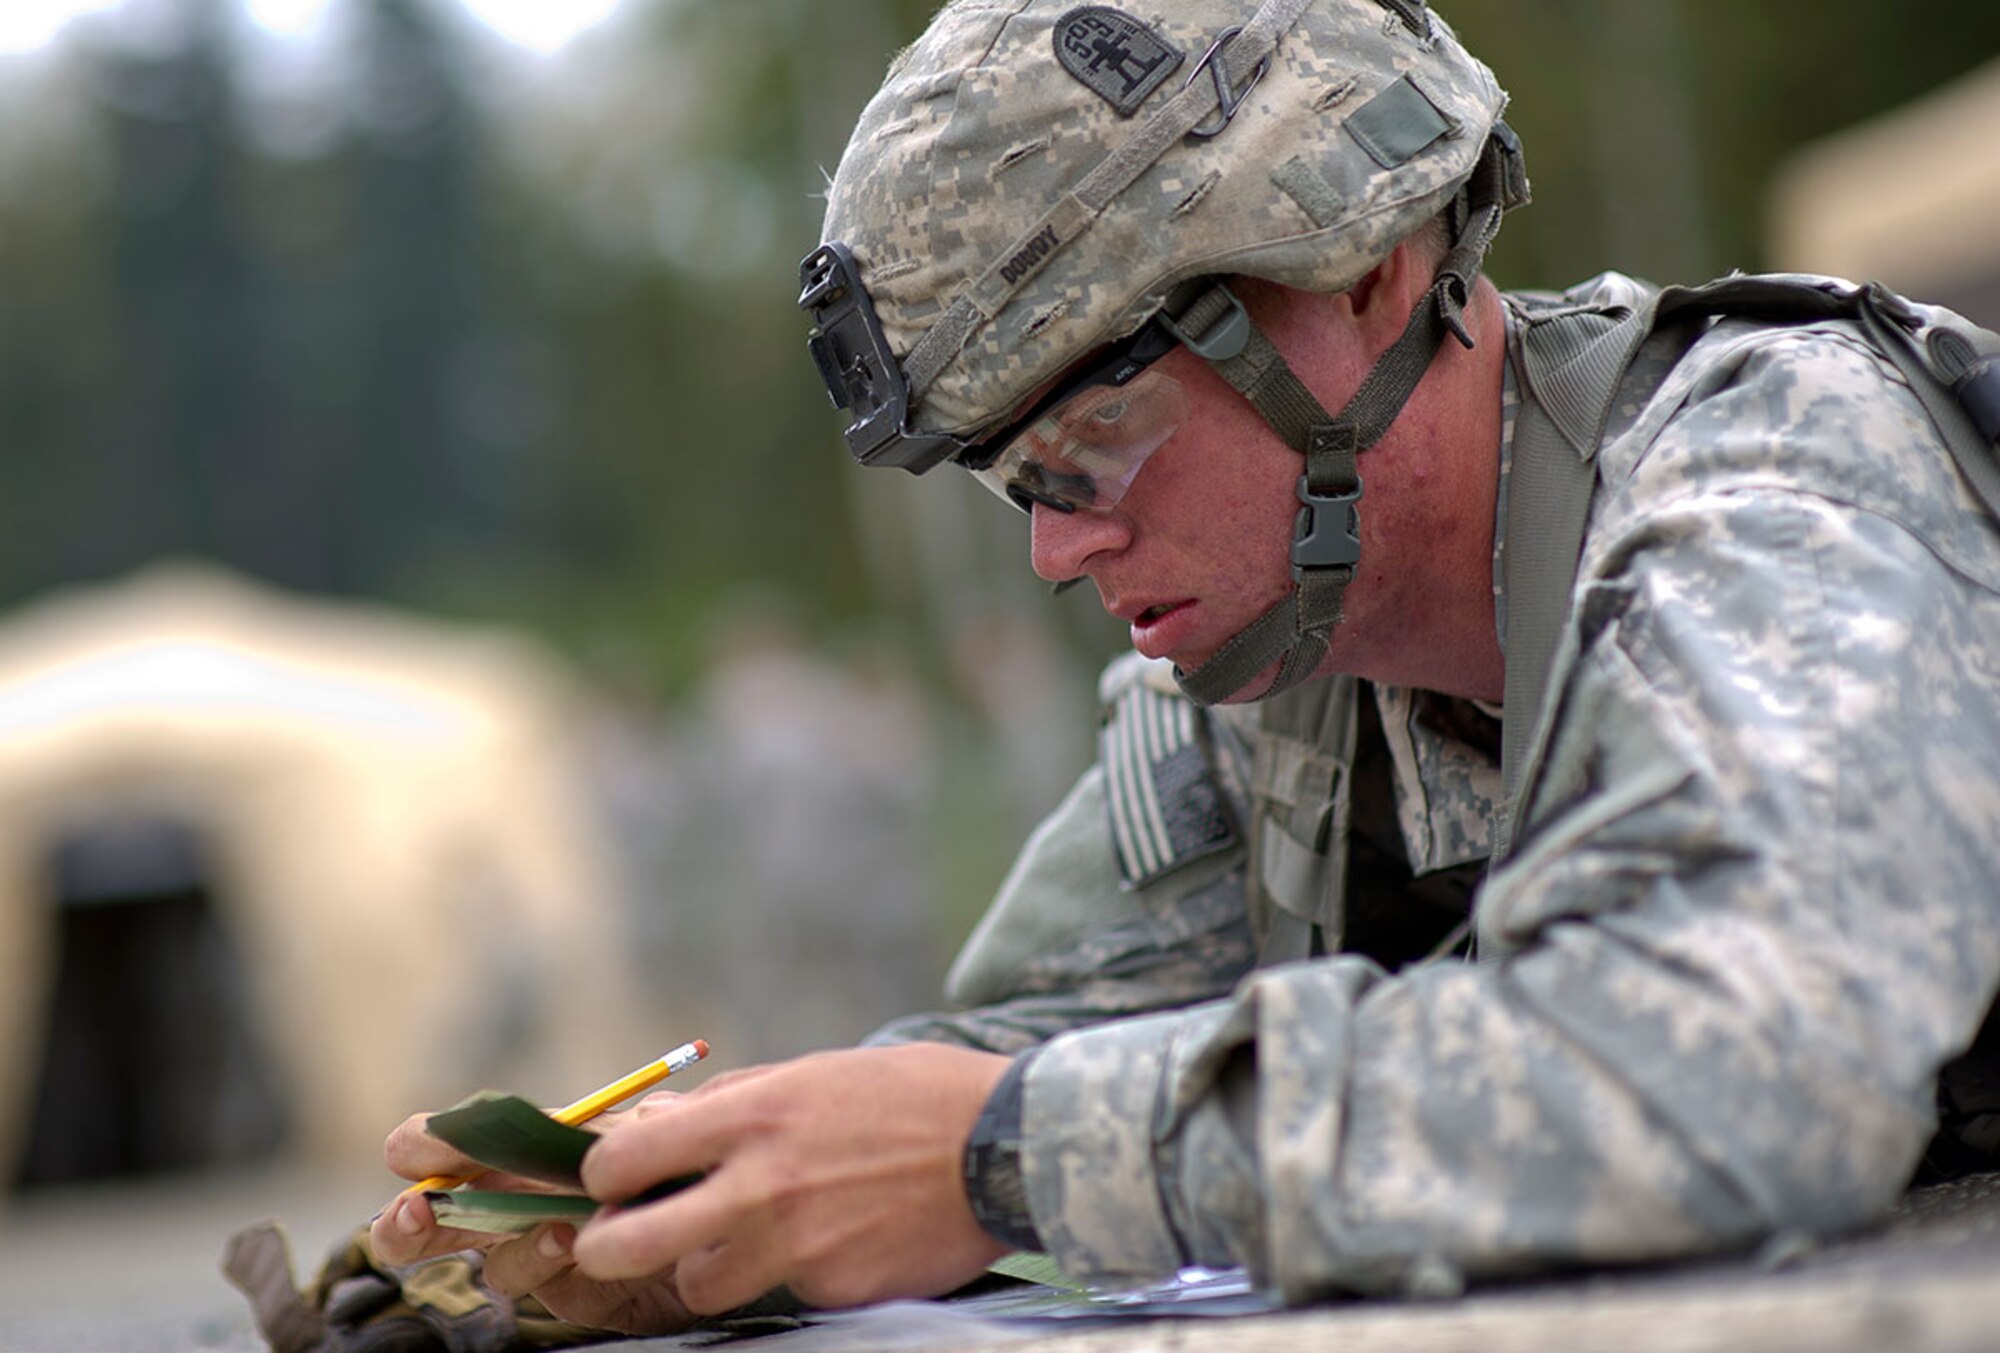 Spc. Dennis Dowey, a Native of Deer Park, Texas, assigned to Baker Company, 3rd Battalion (Airborne), 509th Infantry Regiment, 4th Infantry Brigade Combat Team (Airborne), 25th Infantry Division, U.S. Army Alaska, calculates navigation points as he begins the land navigation course during Expert Infantryman Badge qualification on Joint Base Elmendorf-Richardson, Tuesday, Sept. 9, 2014. The Expert Infantryman Badge was approved by the Secretary of War on October 7, 1943, and is currently awarded to U.S. Army personnel who hold infantry or special forces military occupational specialties and successfully pass the rigors of the course. (U.S. Air Force photo/Justin Connaher)